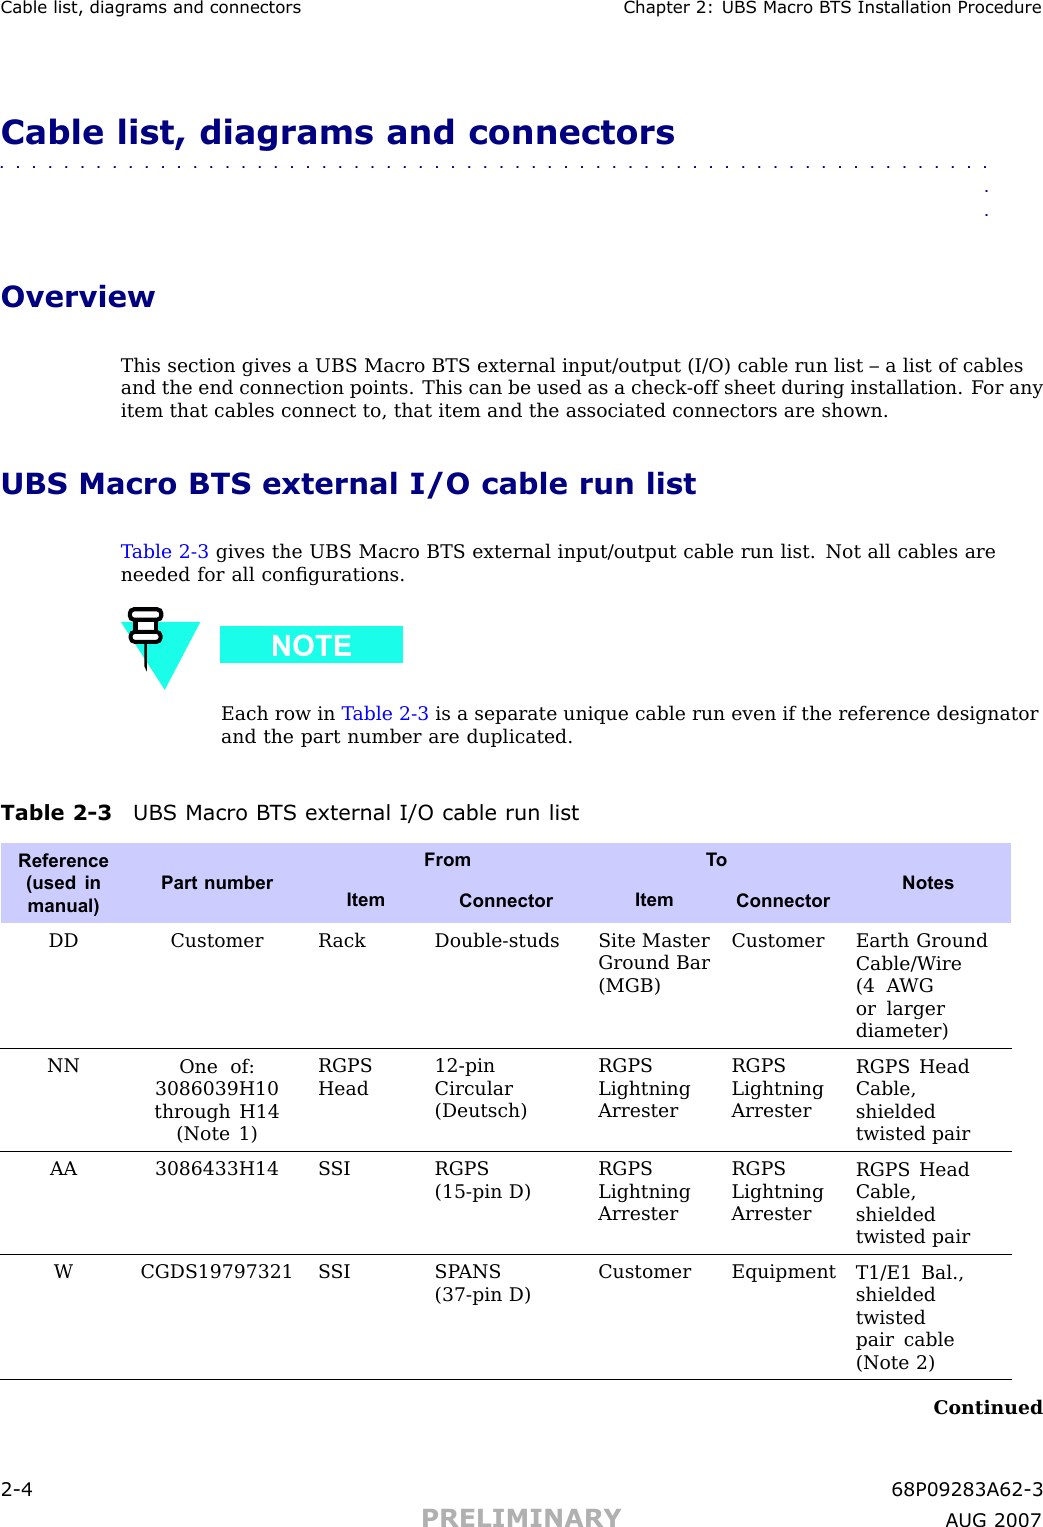 Cable list, diagr ams and connectors Chapter 2: UBS Macro B T S Installation ProcedureCable list, diagrams and connectors■■■■■■■■■■■■■■■■■■■■■■■■■■■■■■■■■■■■■■■■■■■■■■■■■■■■■■■■■■■■■■■■OverviewThis section gives a UBS Macro BTS external input/output (I/O) cable run list – a list of cablesand the end connection points. This can be used as a check -off sheet during installation. F or anyitem that cables connect to, that item and the associated connectors are shown.UBS Macro BTS external I/O cable run listT able 2 -3 gives the UBS Macro BTS external input/output cable run list. Not all cables areneeded for all conﬁgurations.Each row in T able 2 -3 is a separate unique cable run even if the reference designatorand the part number are duplicated.Table 2 -3 UBS Macro B T S external I/O cable run listFrom T oReference(used inmanual)Part numberItemConnectorItemConnectorNotesDDCustomerR ack Double-studsSite MasterGround Bar(MGB)CustomerEarth GroundCable/W ire(4 A WGor largerdiameter)NNOne of:3086039H10through H14(Note 1)RGPSHead12-pinCircular(Deutsch)RGPSLightningArresterRGPSLightningArresterRGPS HeadCable,shieldedtwisted pairAA3086433H14 S SI RGPS(15-pin D)RGPSLightningArresterRGPSLightningArresterRGPS HeadCable,shieldedtwisted pairWCGDS19797321 S SI SP ANS(37-pin D)Customer EquipmentT1/E1 Bal.,shieldedtwistedpair cable(Note 2)Continued2 -4 68P09283A62 -3PRELIMINARY A UG 2007